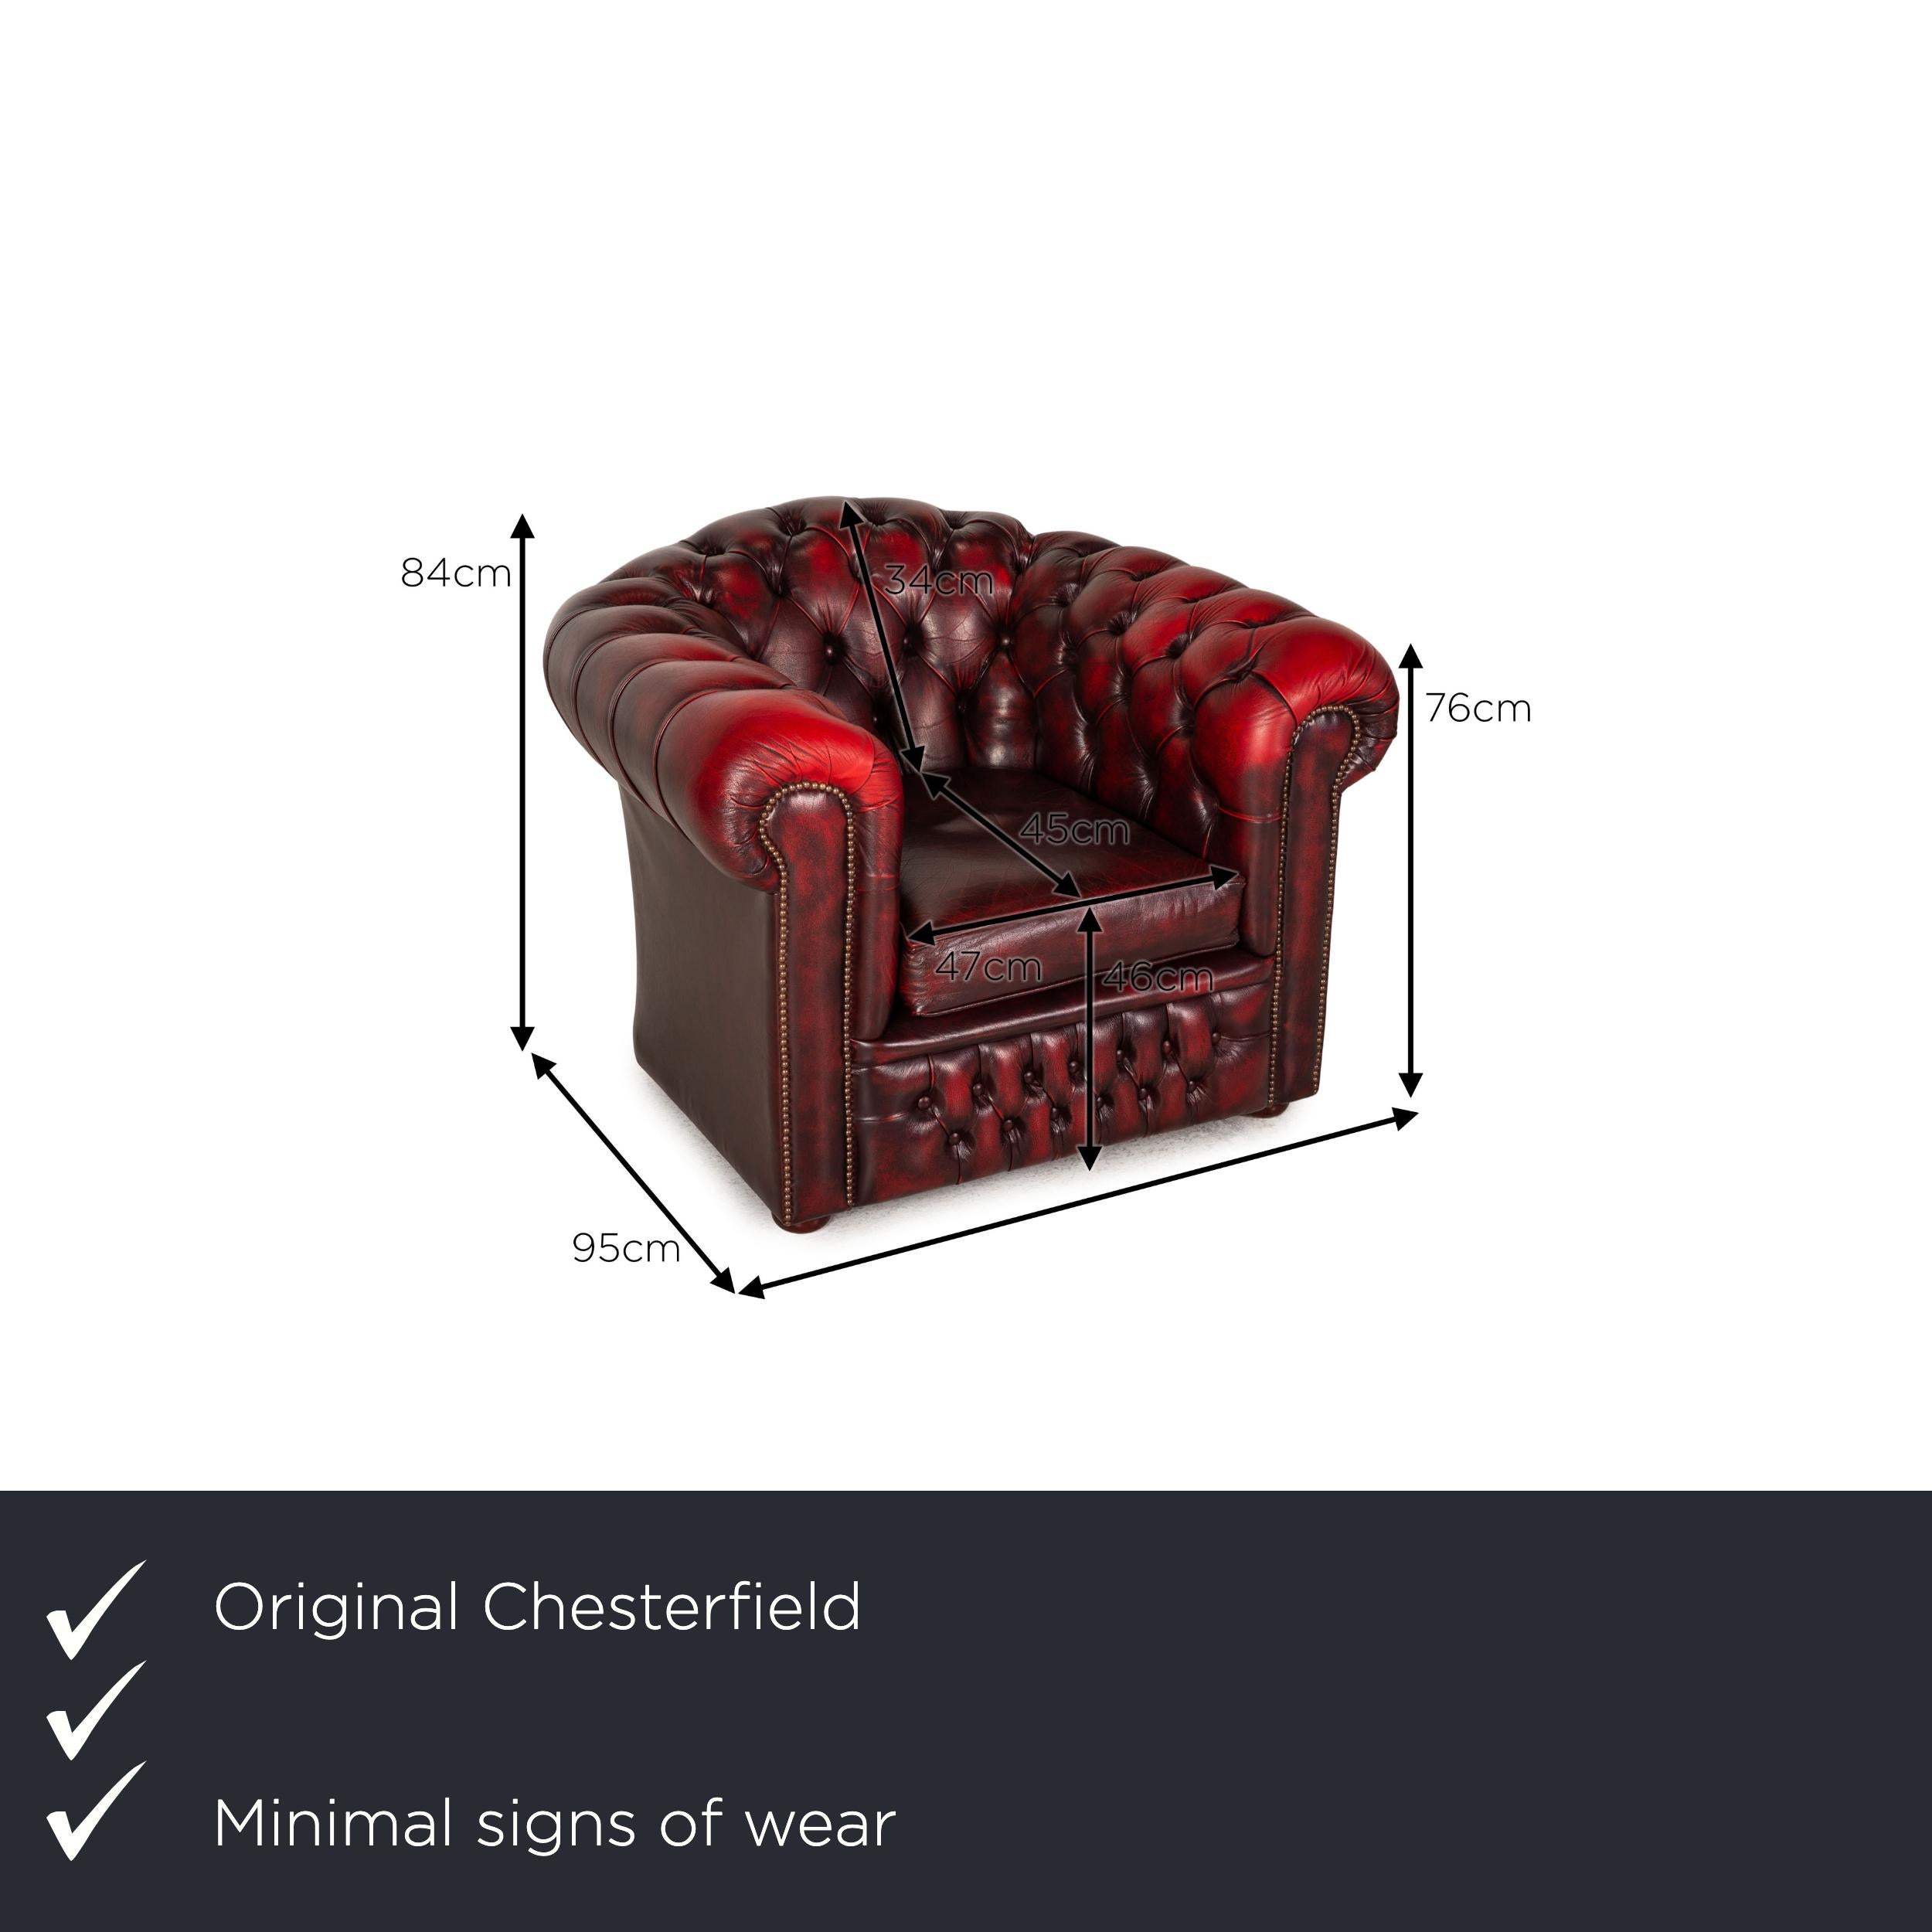 We present to you a Chesterfield Tudor leather armchair dark red.

Product measurements in centimeters:

Depth: 95
Width: 113
Height: 84
Seat height: 46
Rest height: 76
Seat depth: 45
Seat width: 47
Back height: 34.
    
   